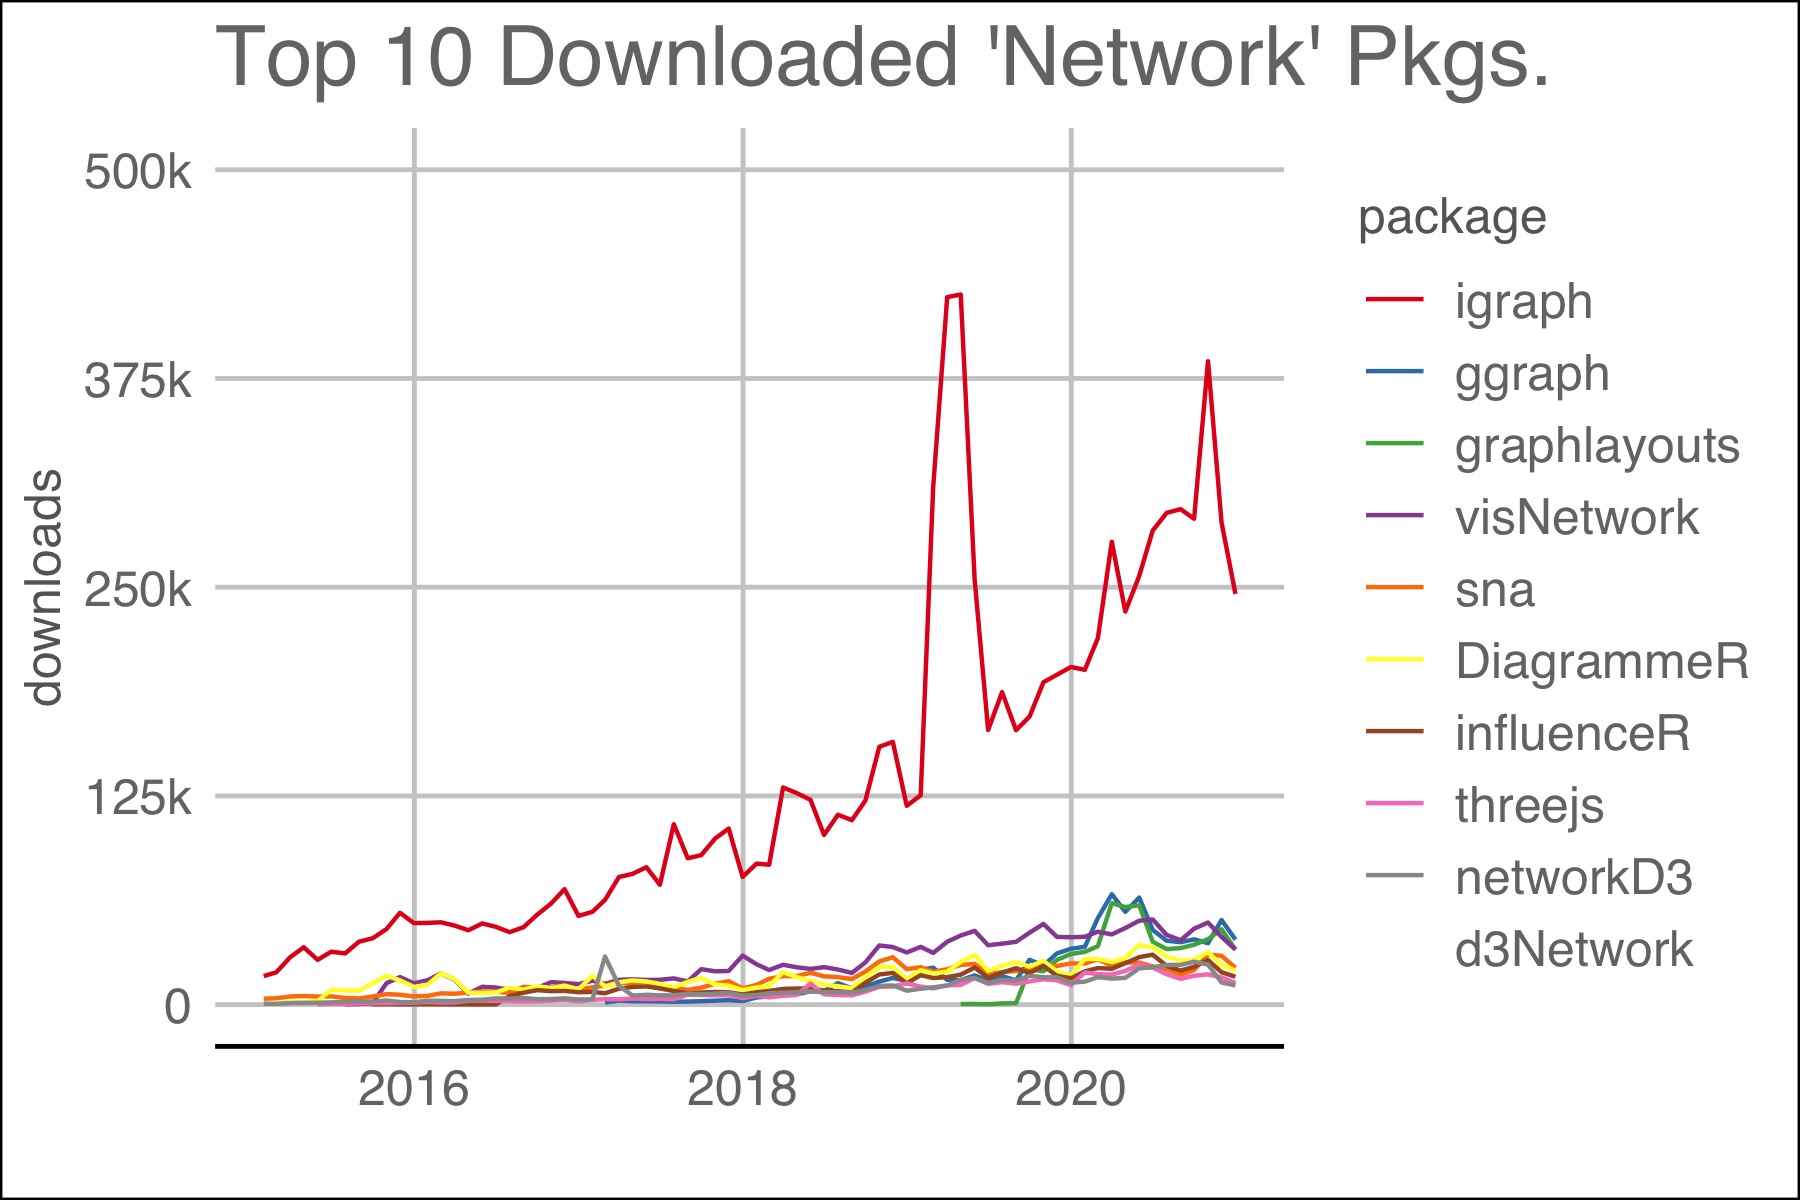 Figure to left shows igraph downloads to total downloads. Figure to right, with y-axis scale and labels changed, shows igraph downloads relative to other network packages.